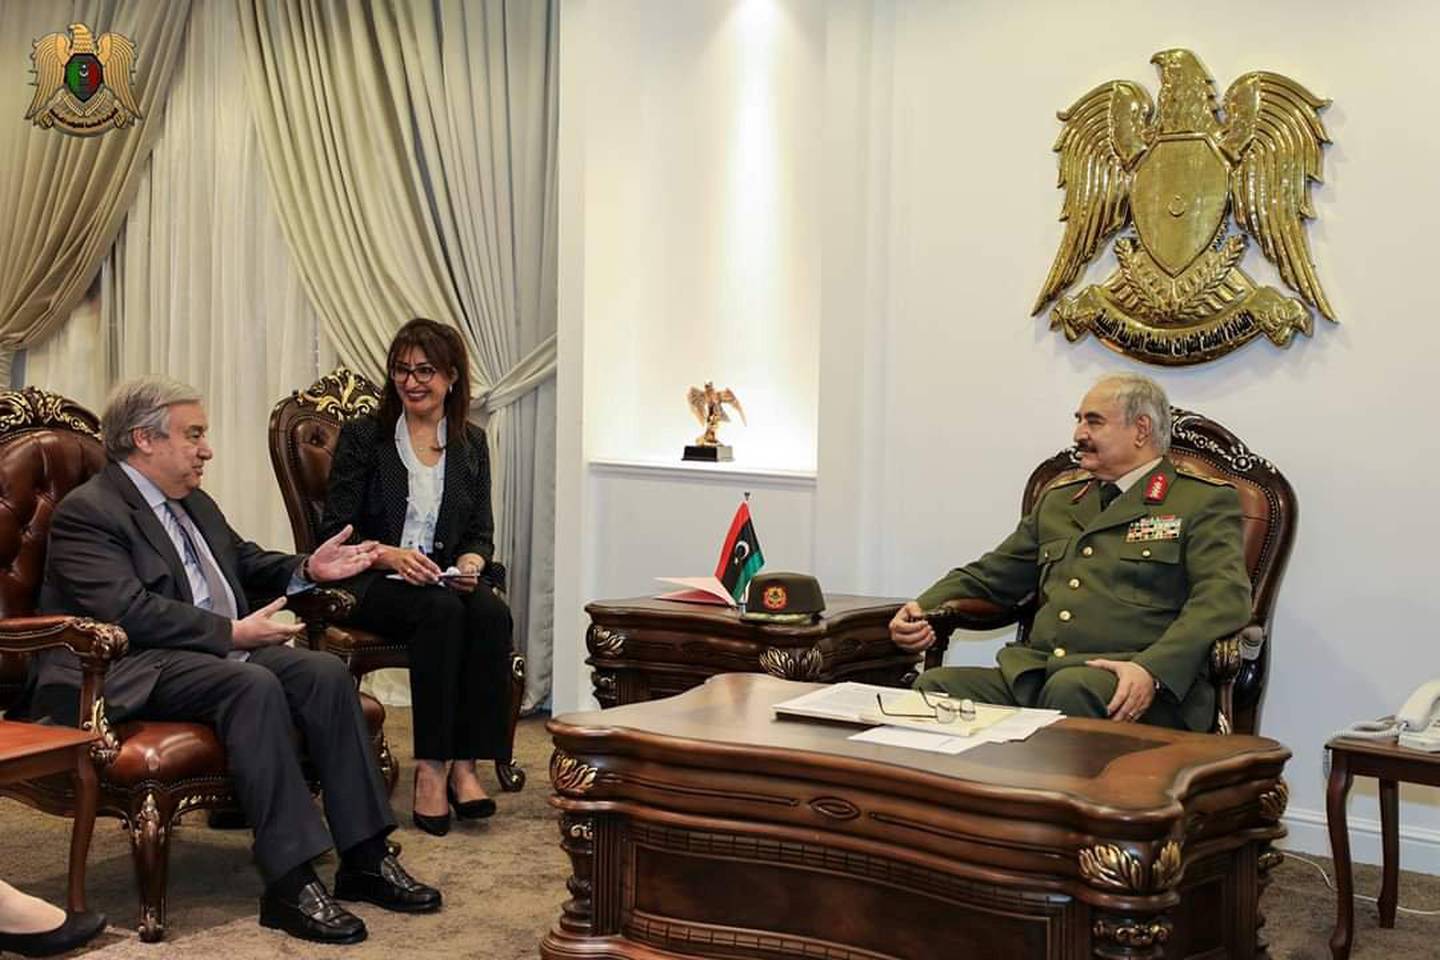 Secretary General of the United Nations Antonio Guterres meets with Libyan military commander Khalifa Haftar in Benghazi, Libya April 5, 2019. Media office of the Libyan Army/Handout via REUTERS ATTENTION EDITORS - THIS IMAGE WAS PROVIDED BY A THIRD PARTY NO RESALES. NO ARCHIVE.